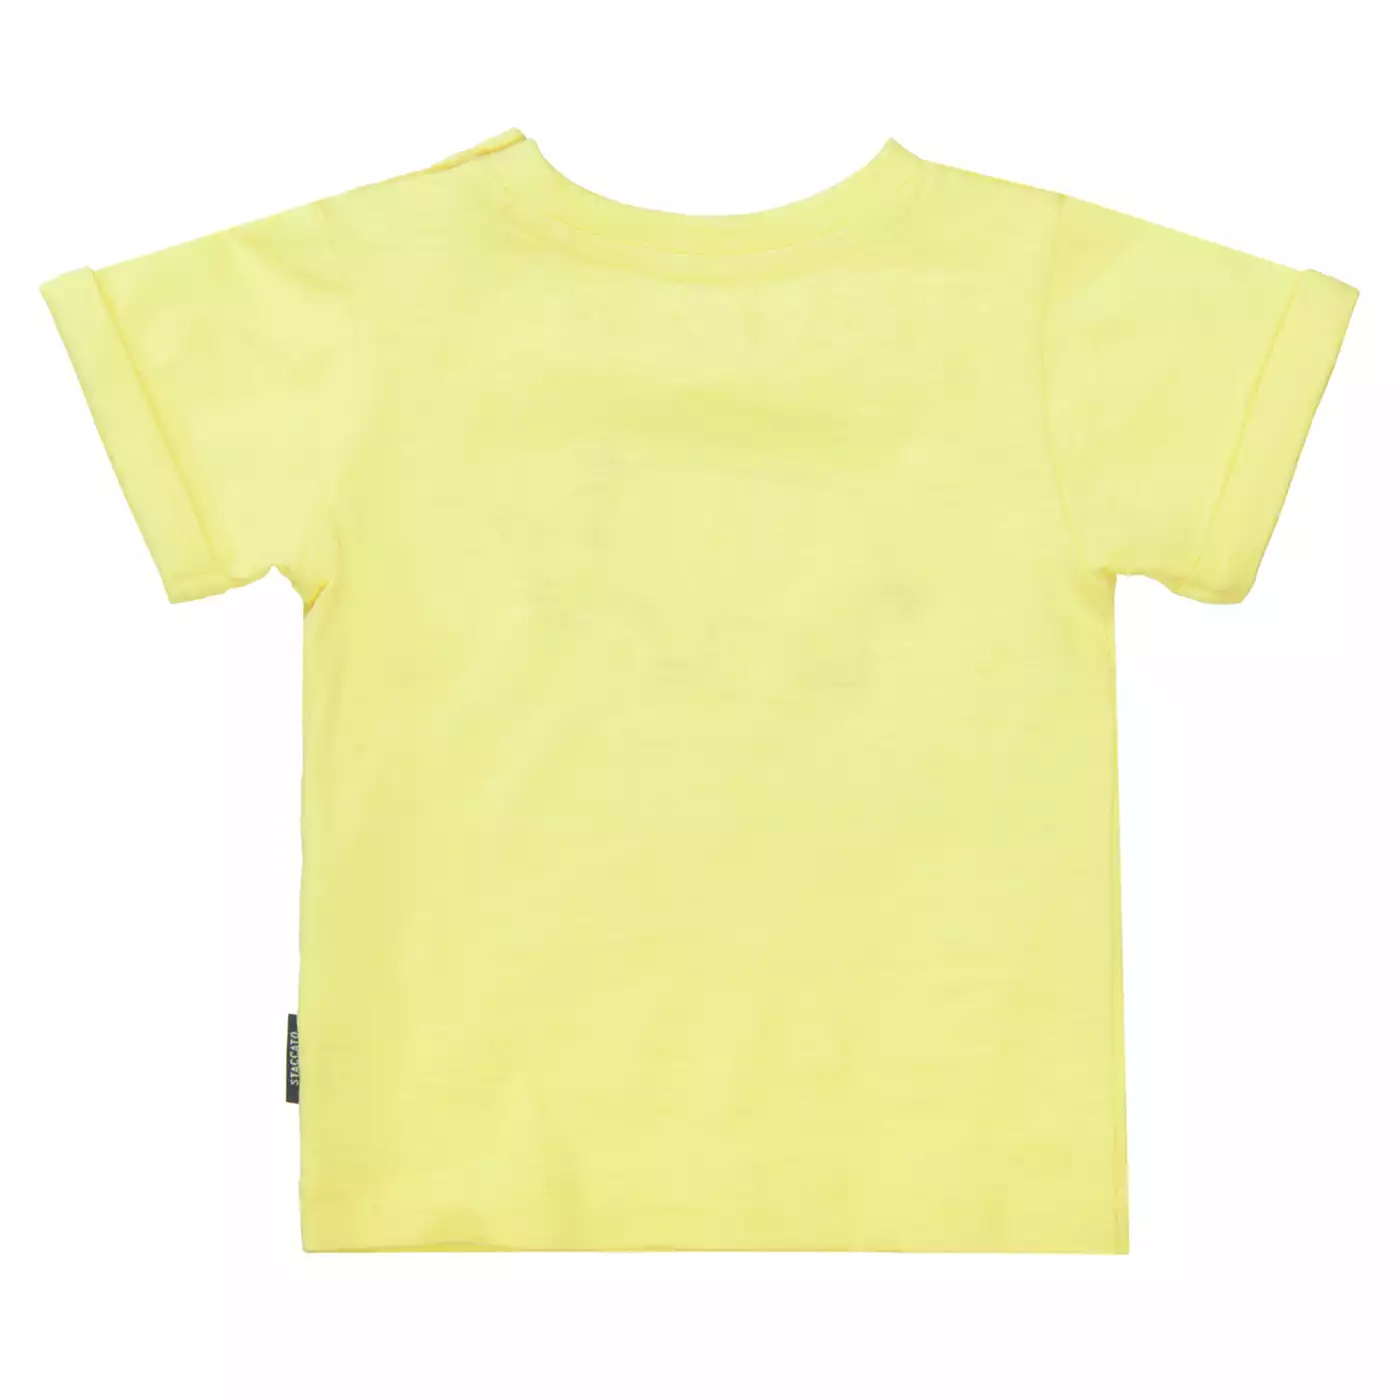 T-Shirt Nashorn STACCATO Gelb 2006580299603 4